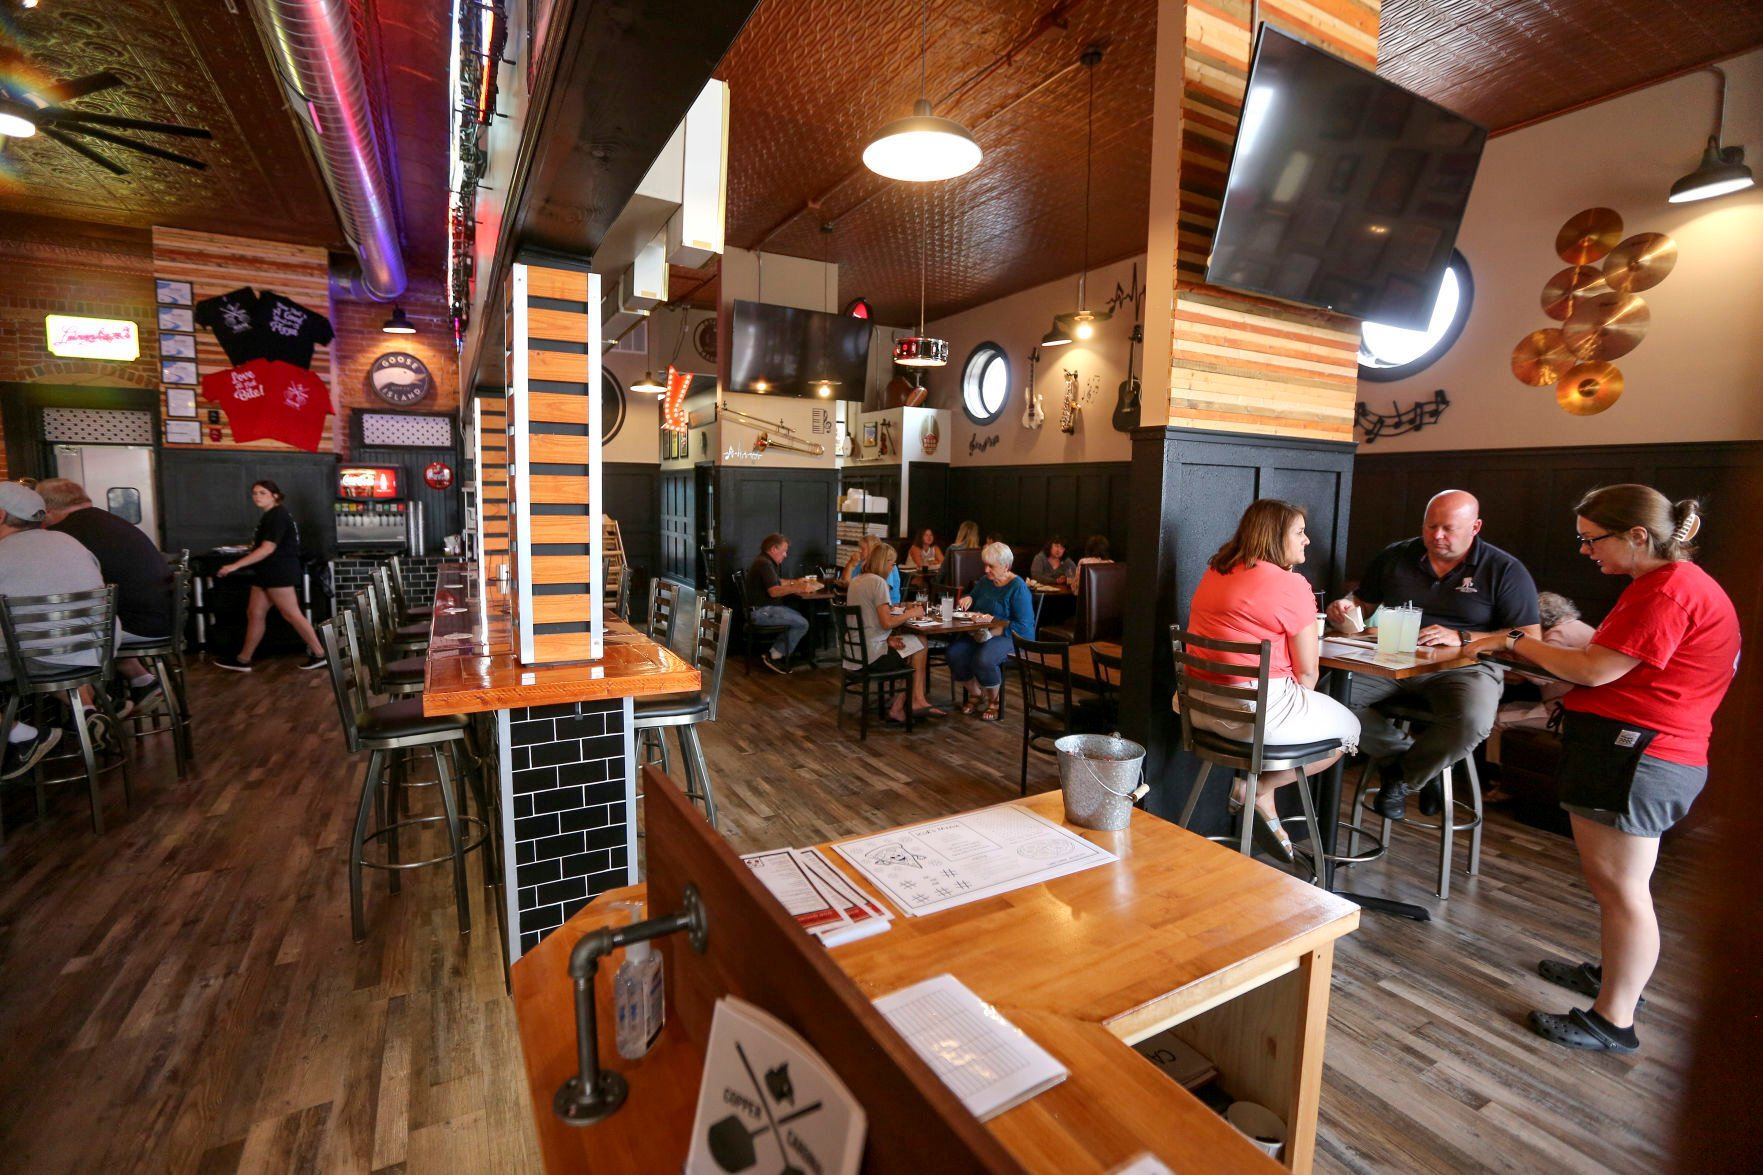 Copper Cardinal Pizza Pub opened last week in downtown Maquoketa, Iowa.    PHOTO CREDIT: Dave Kettering